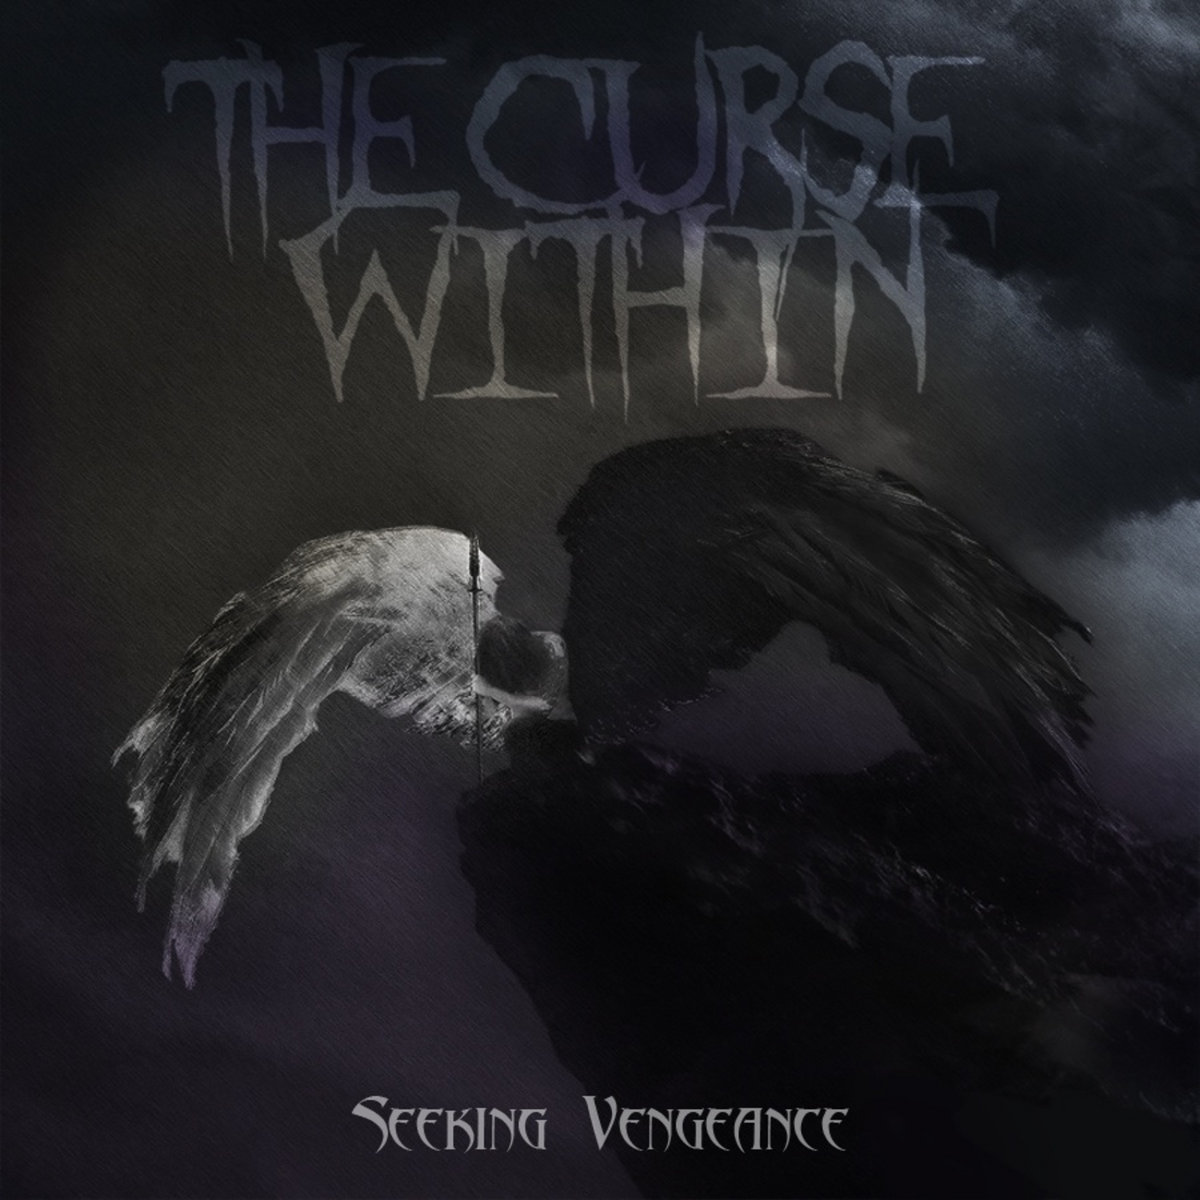 THE CURSE WITHIN - Seeking Vengeance cover 